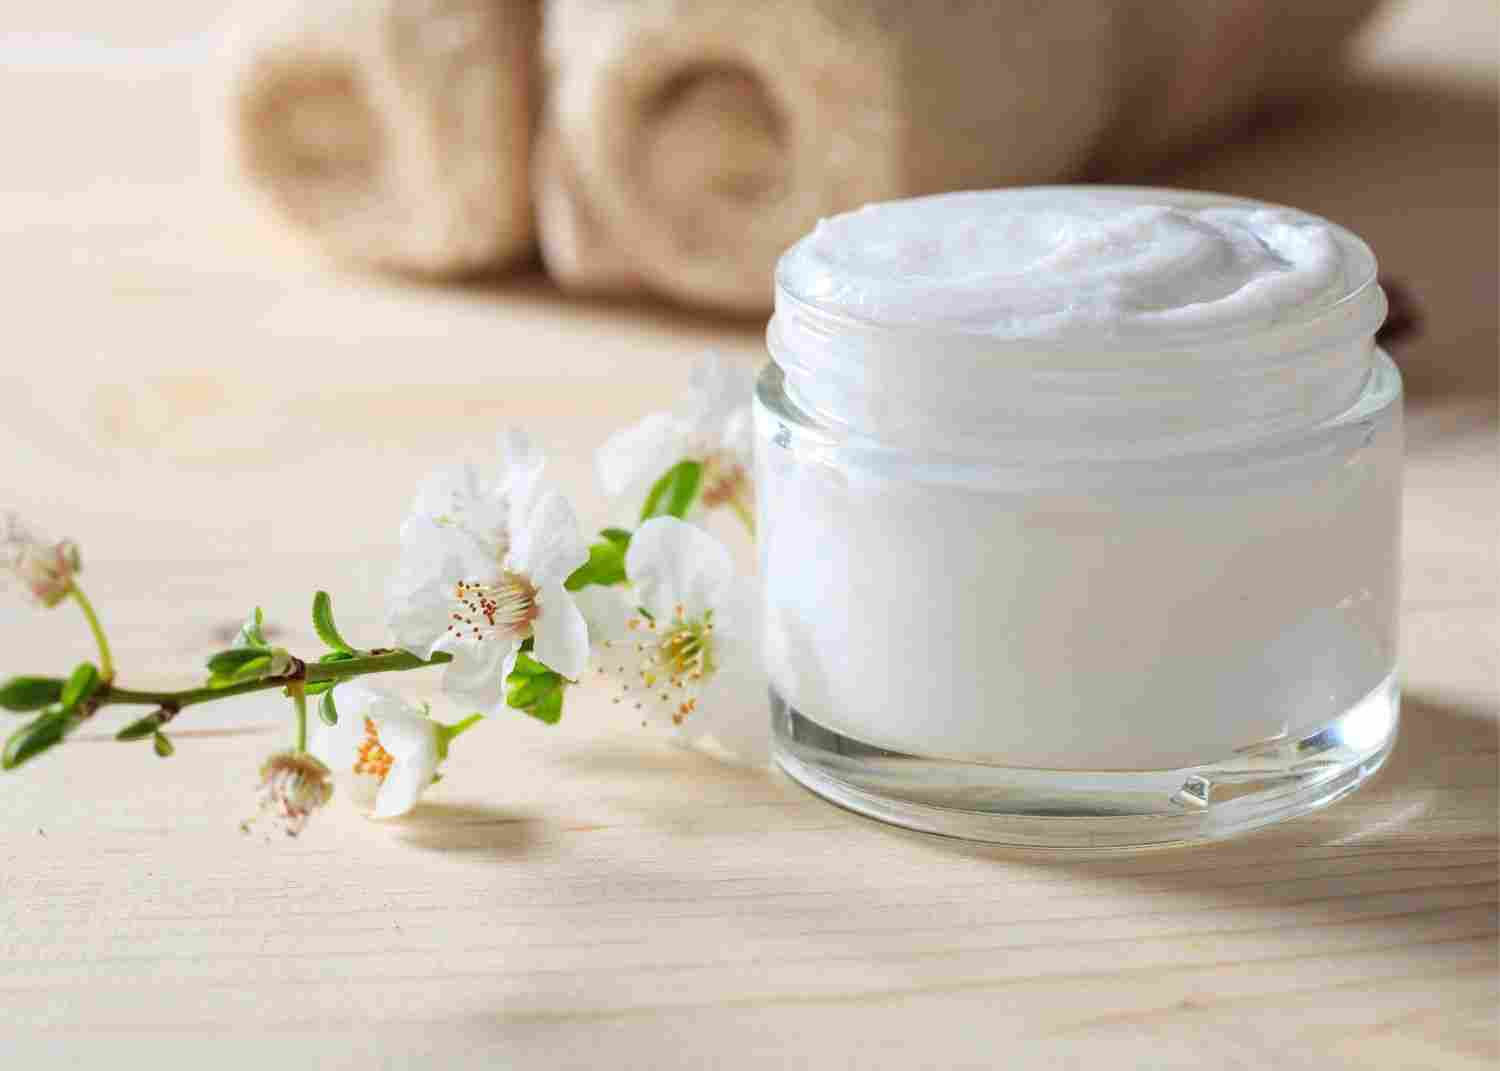 Reasons Your Spa Should Sell a Body Moisturizer